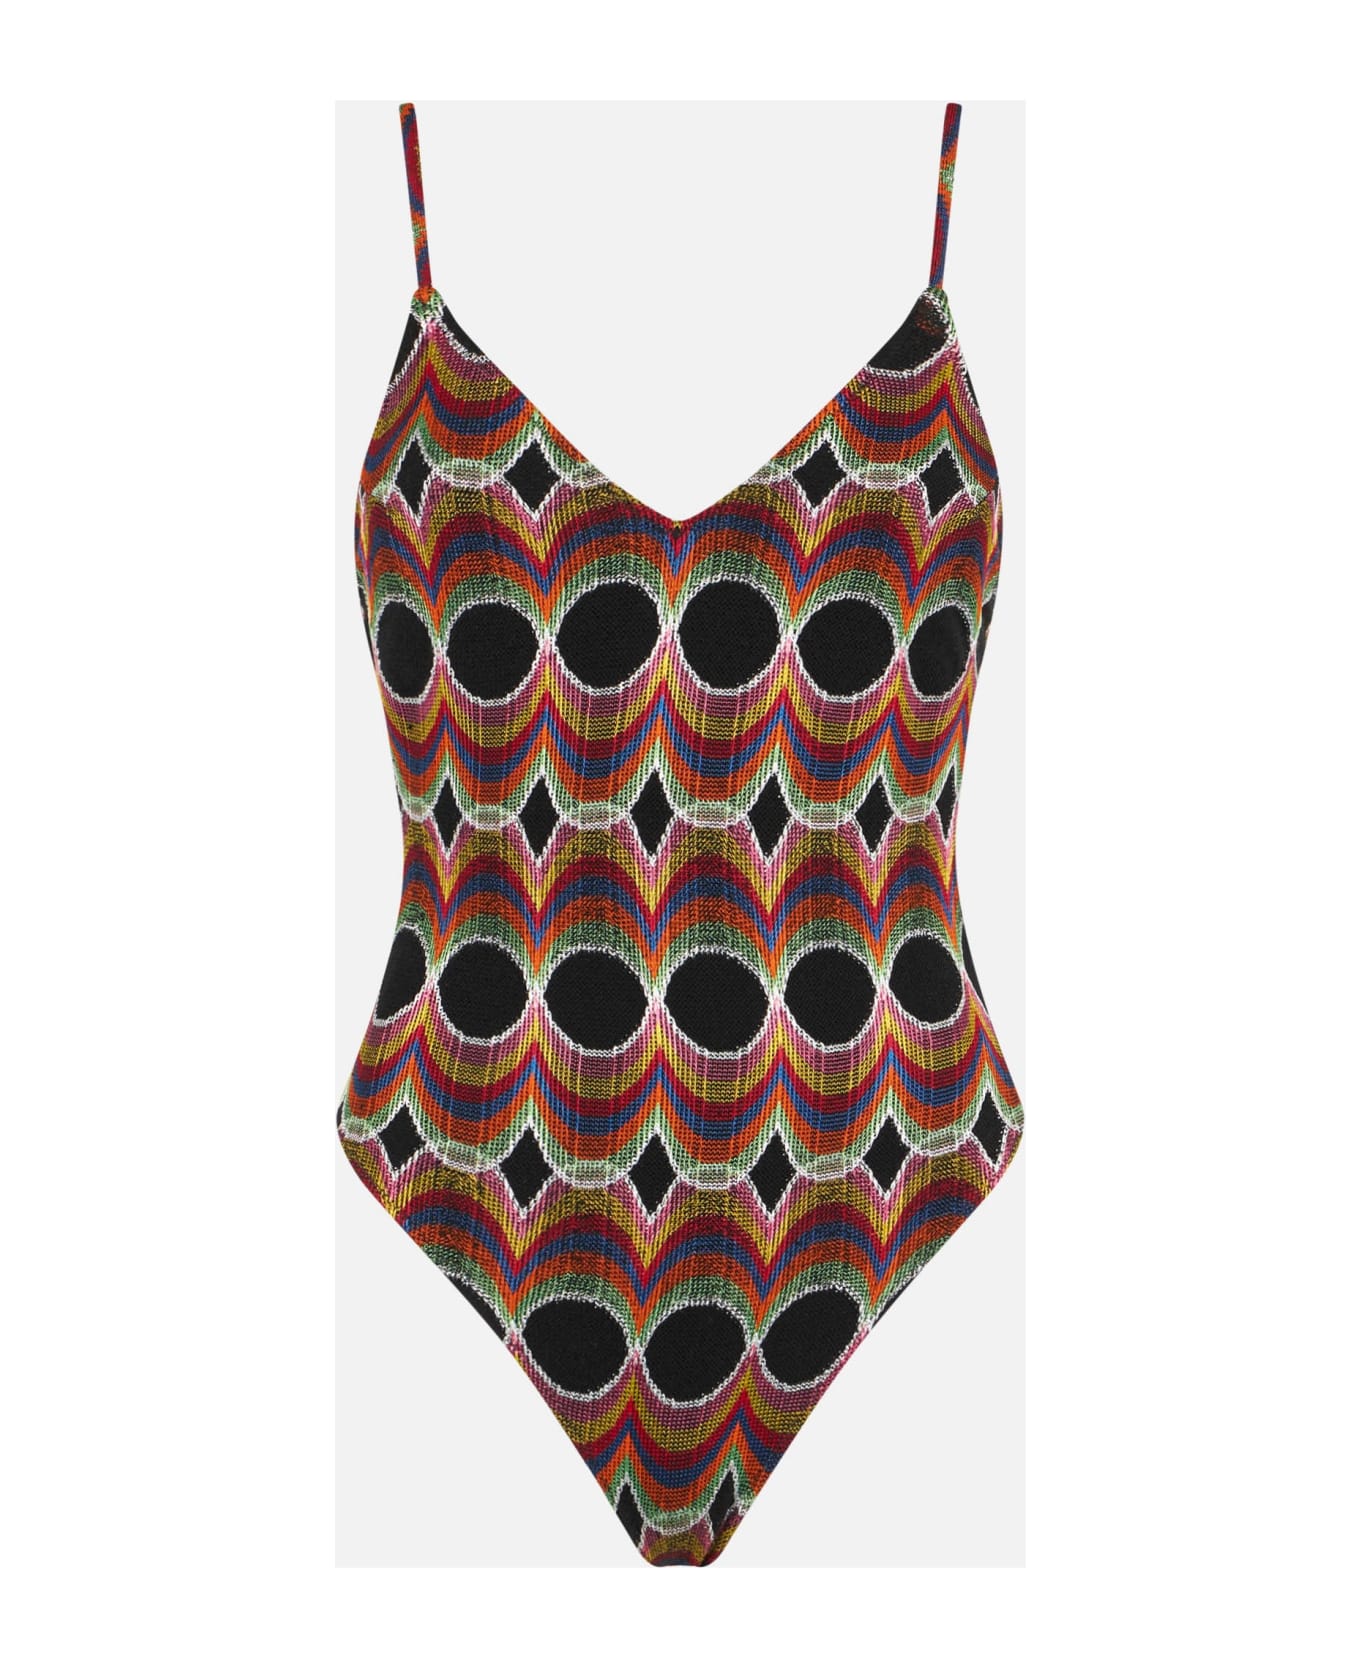 MC2 Saint Barth Woman One Piece Swimsuit With Pattern - BROWN ワンピース